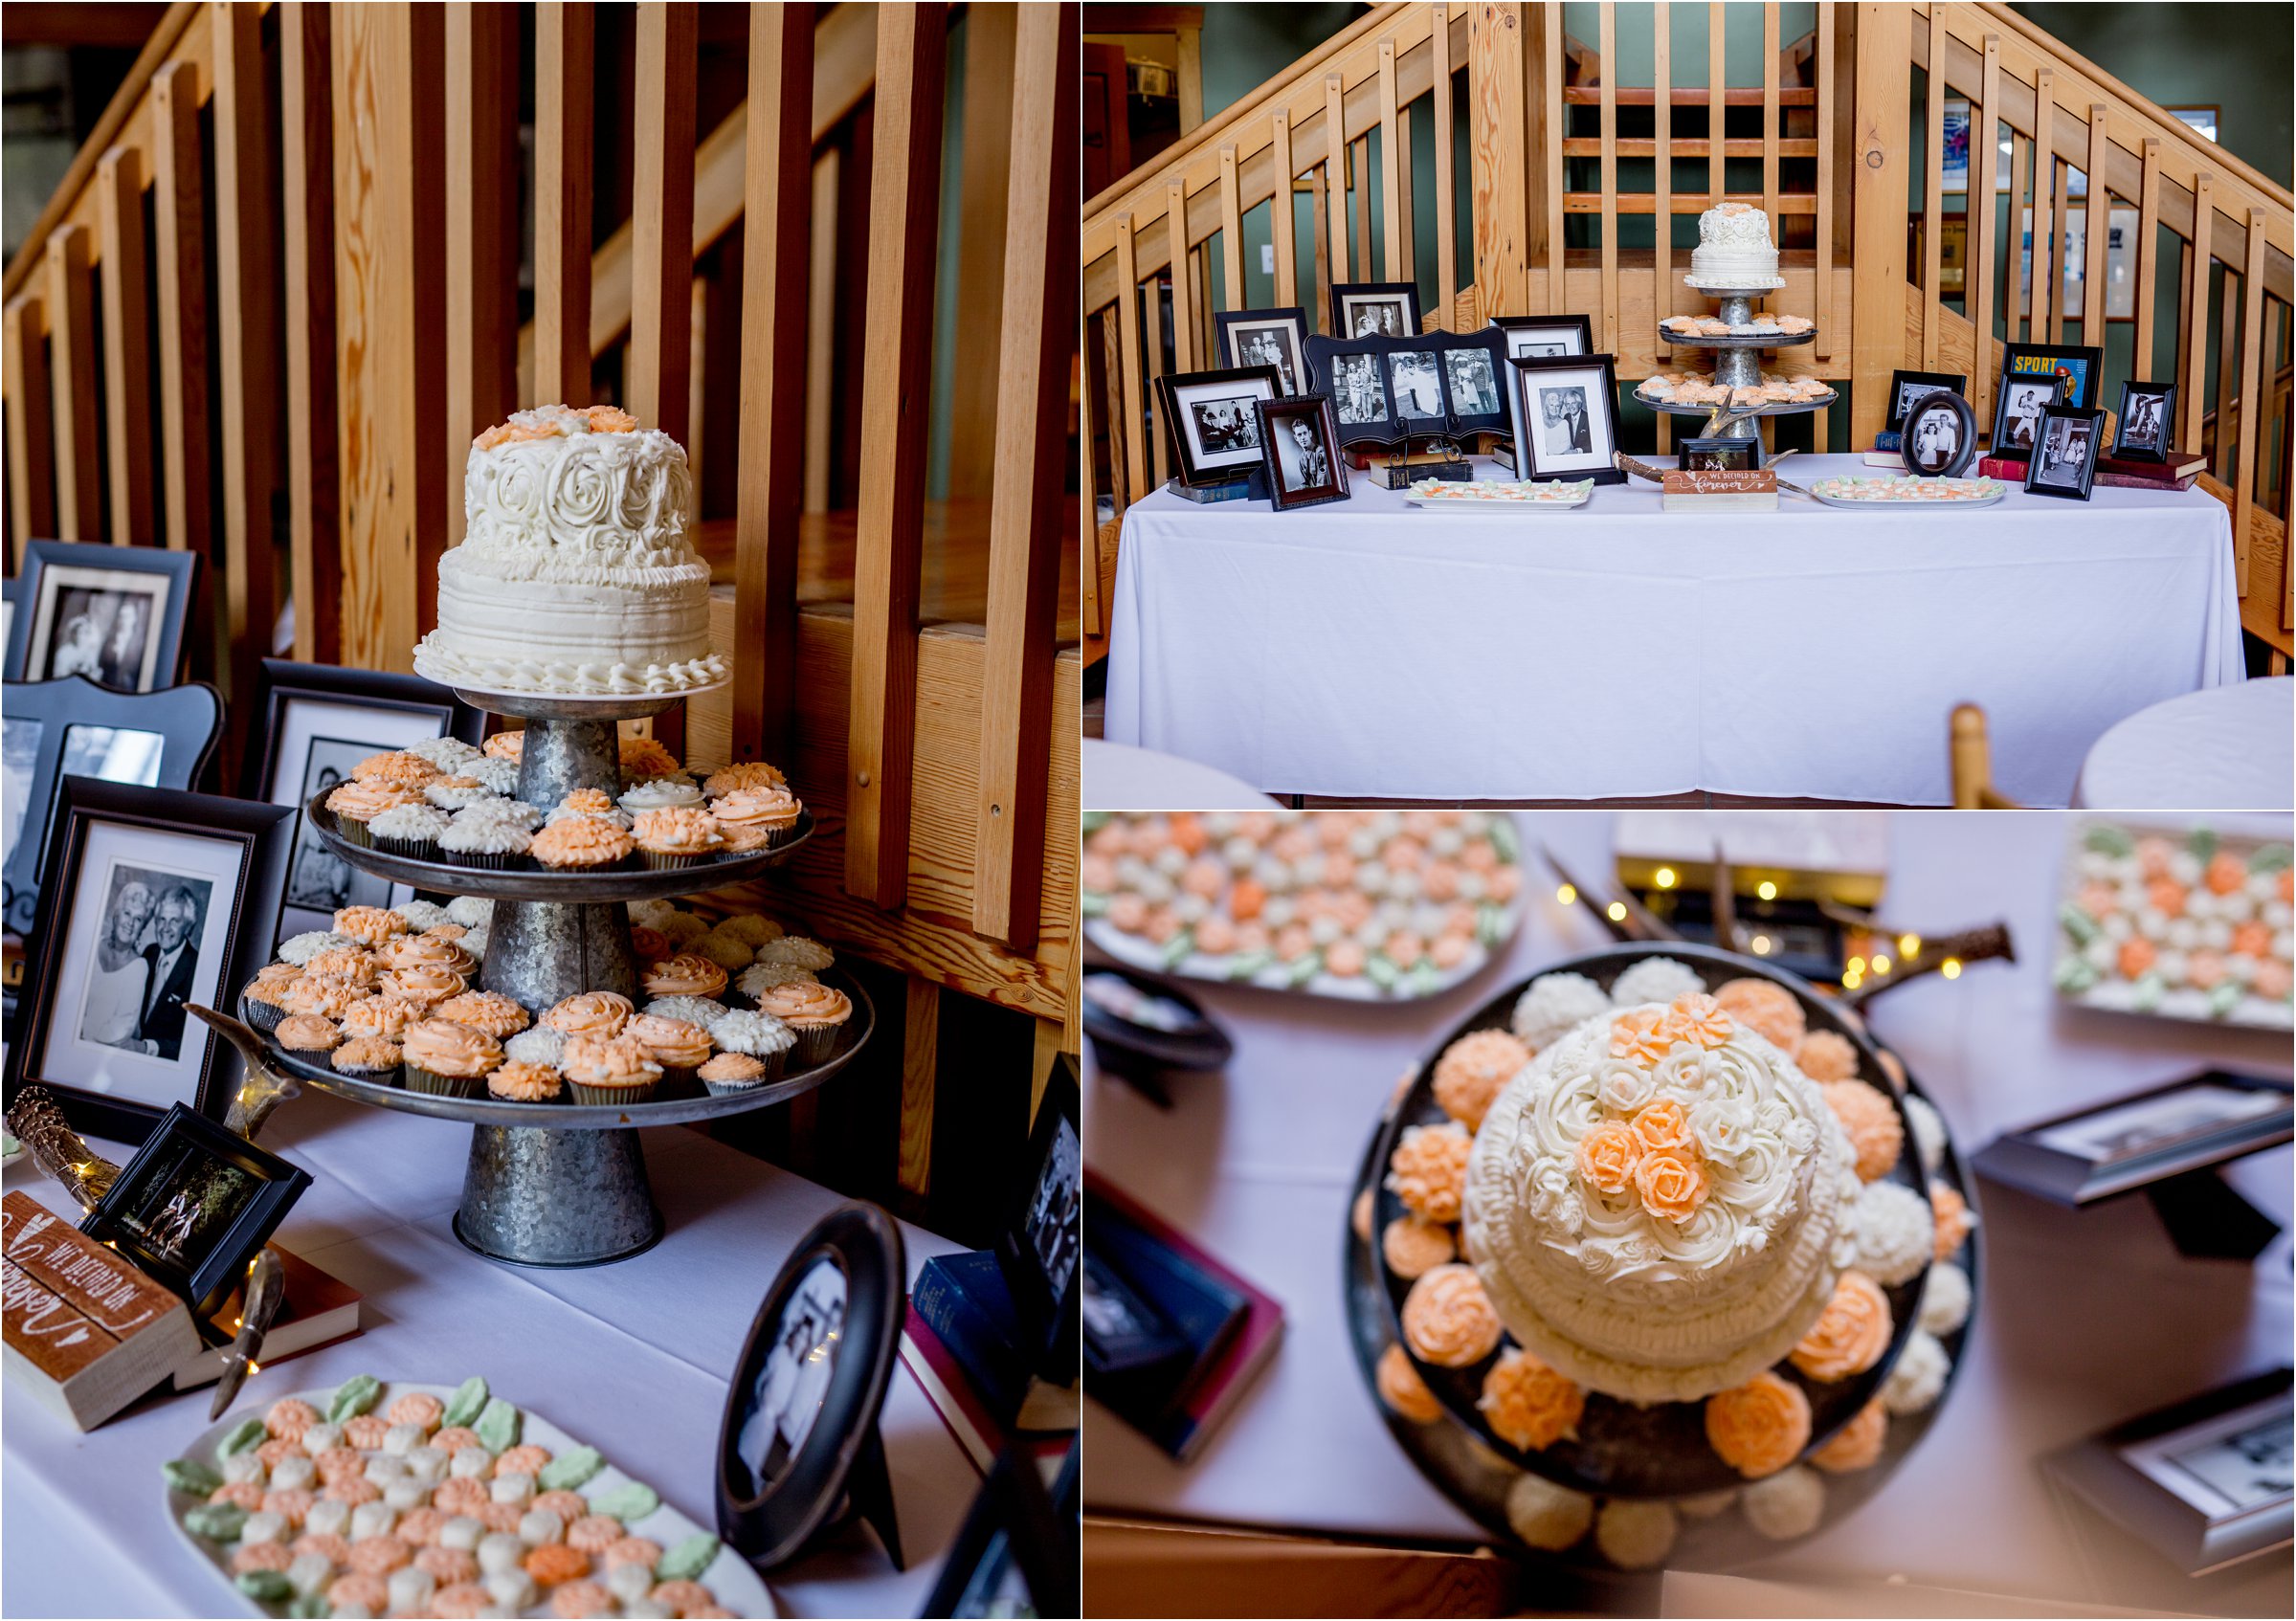 cream and orange wedding cake and cupcakes sits surrounded by family photos and memorbilia